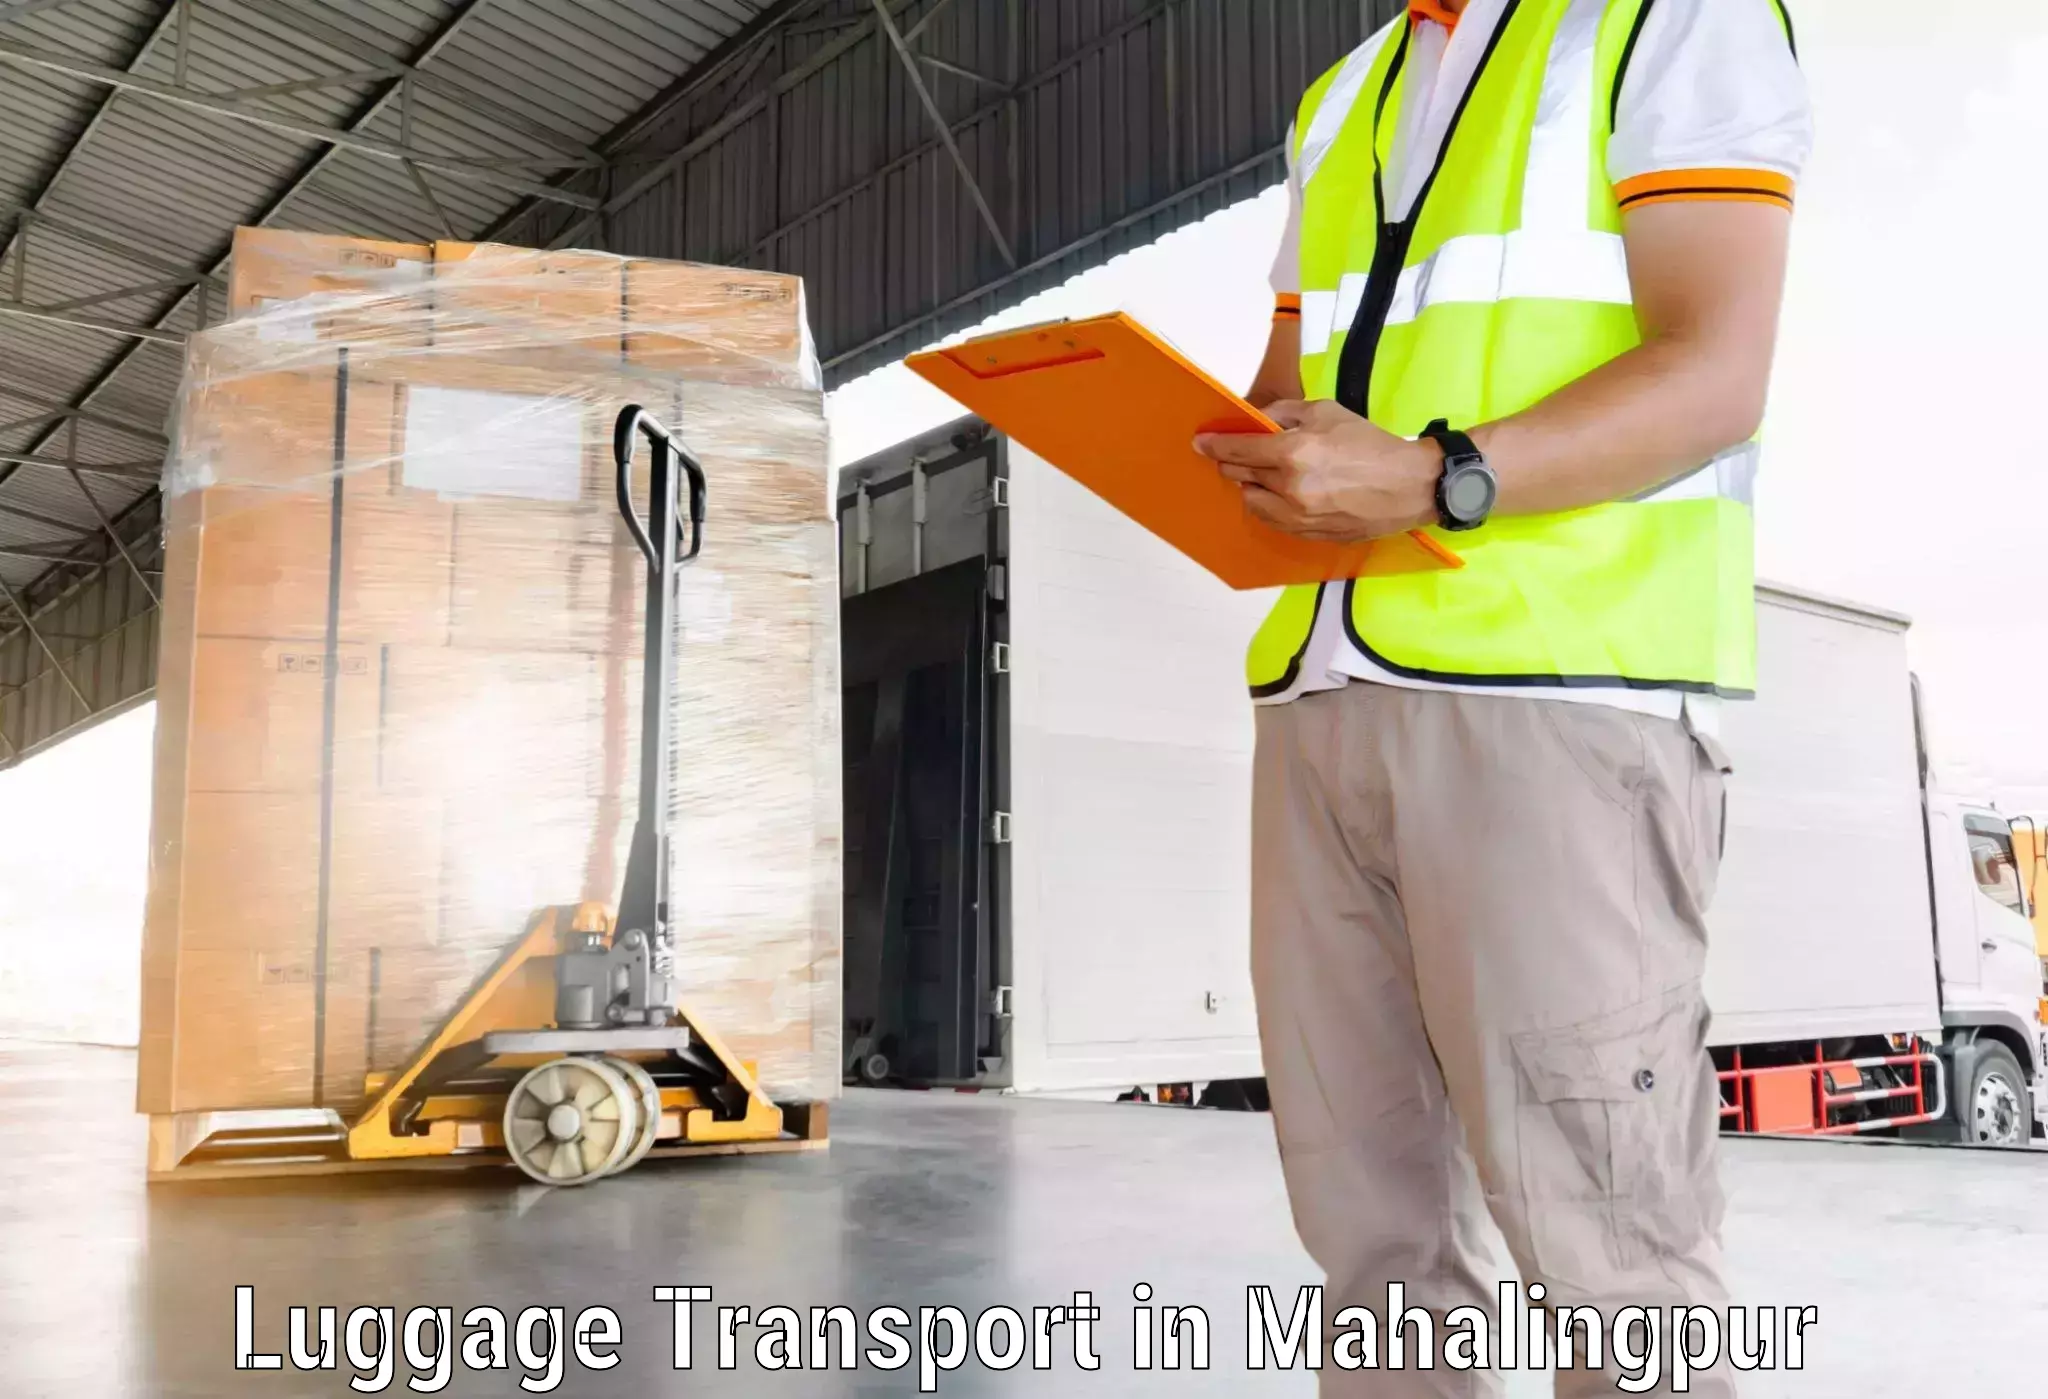 Long distance luggage transport in Mahalingpur